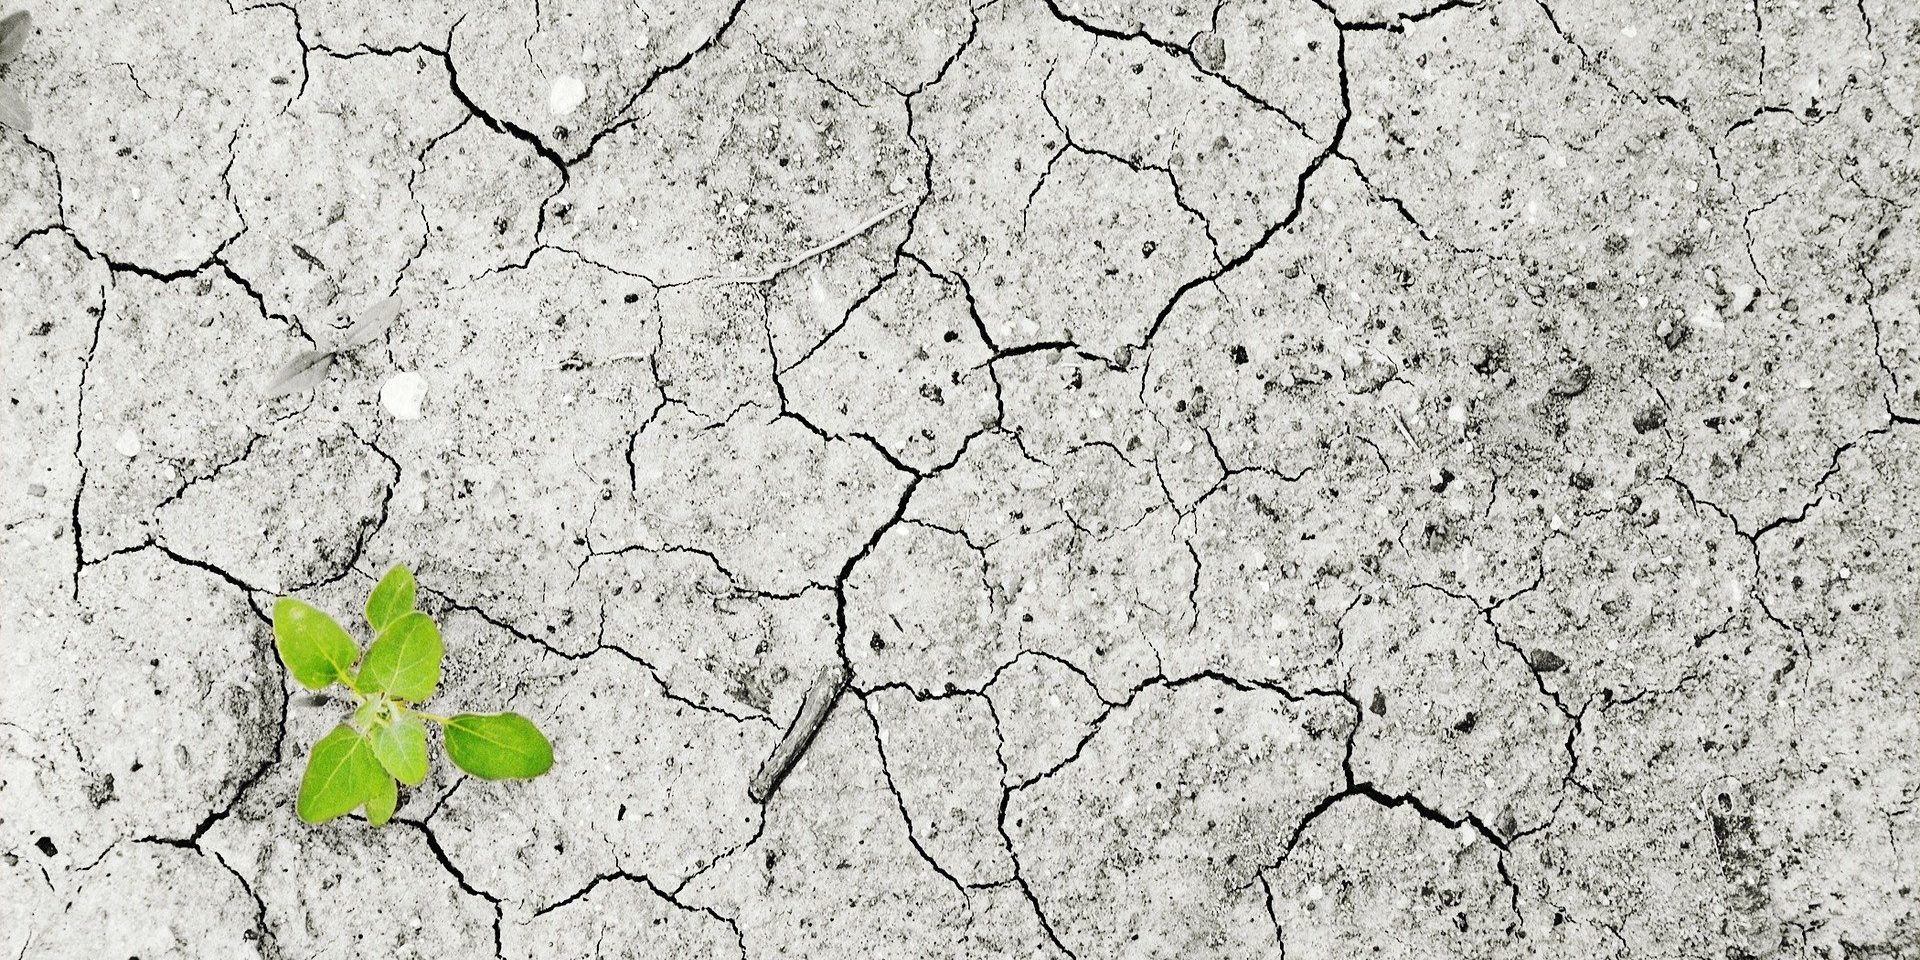 Dry cracked earth with an emerging green sprout